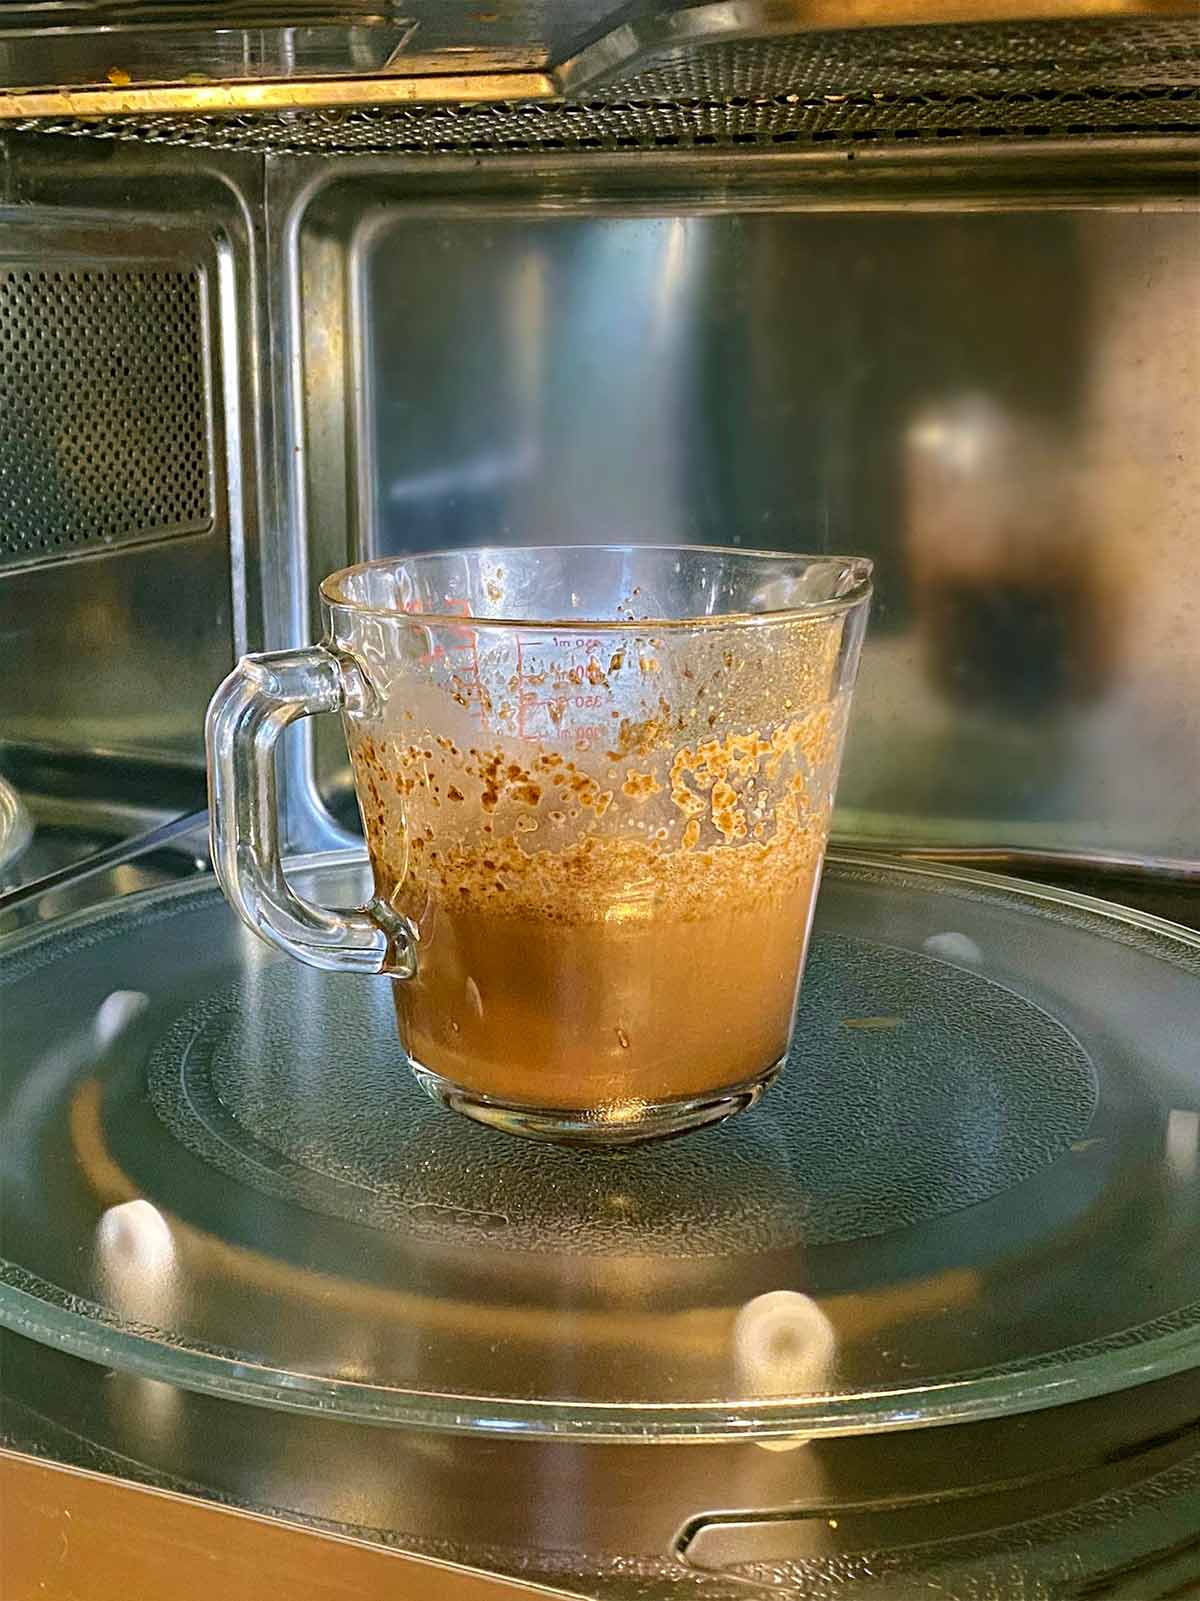 A jug of chocolate milk in a microwave.